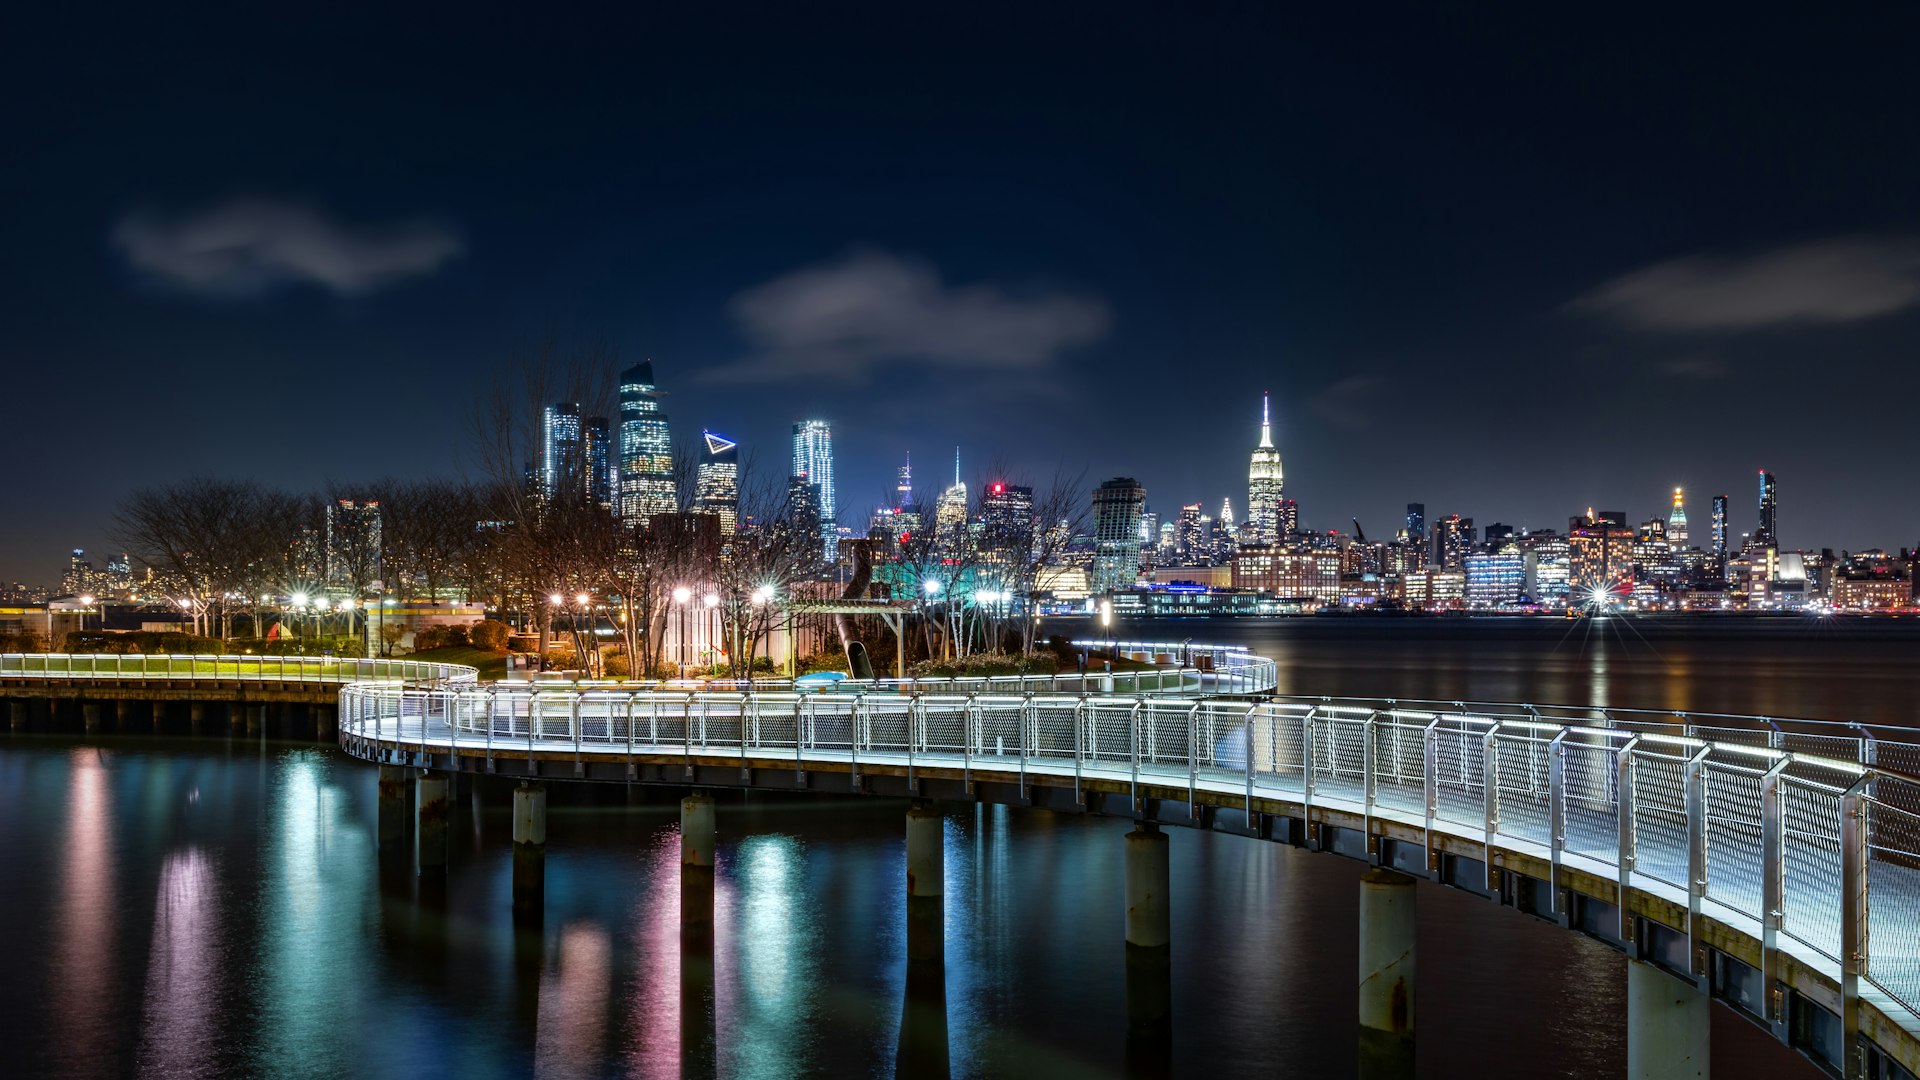 Pier C park in Hoboken, New Jersey by night, with the New York City skyline in the background